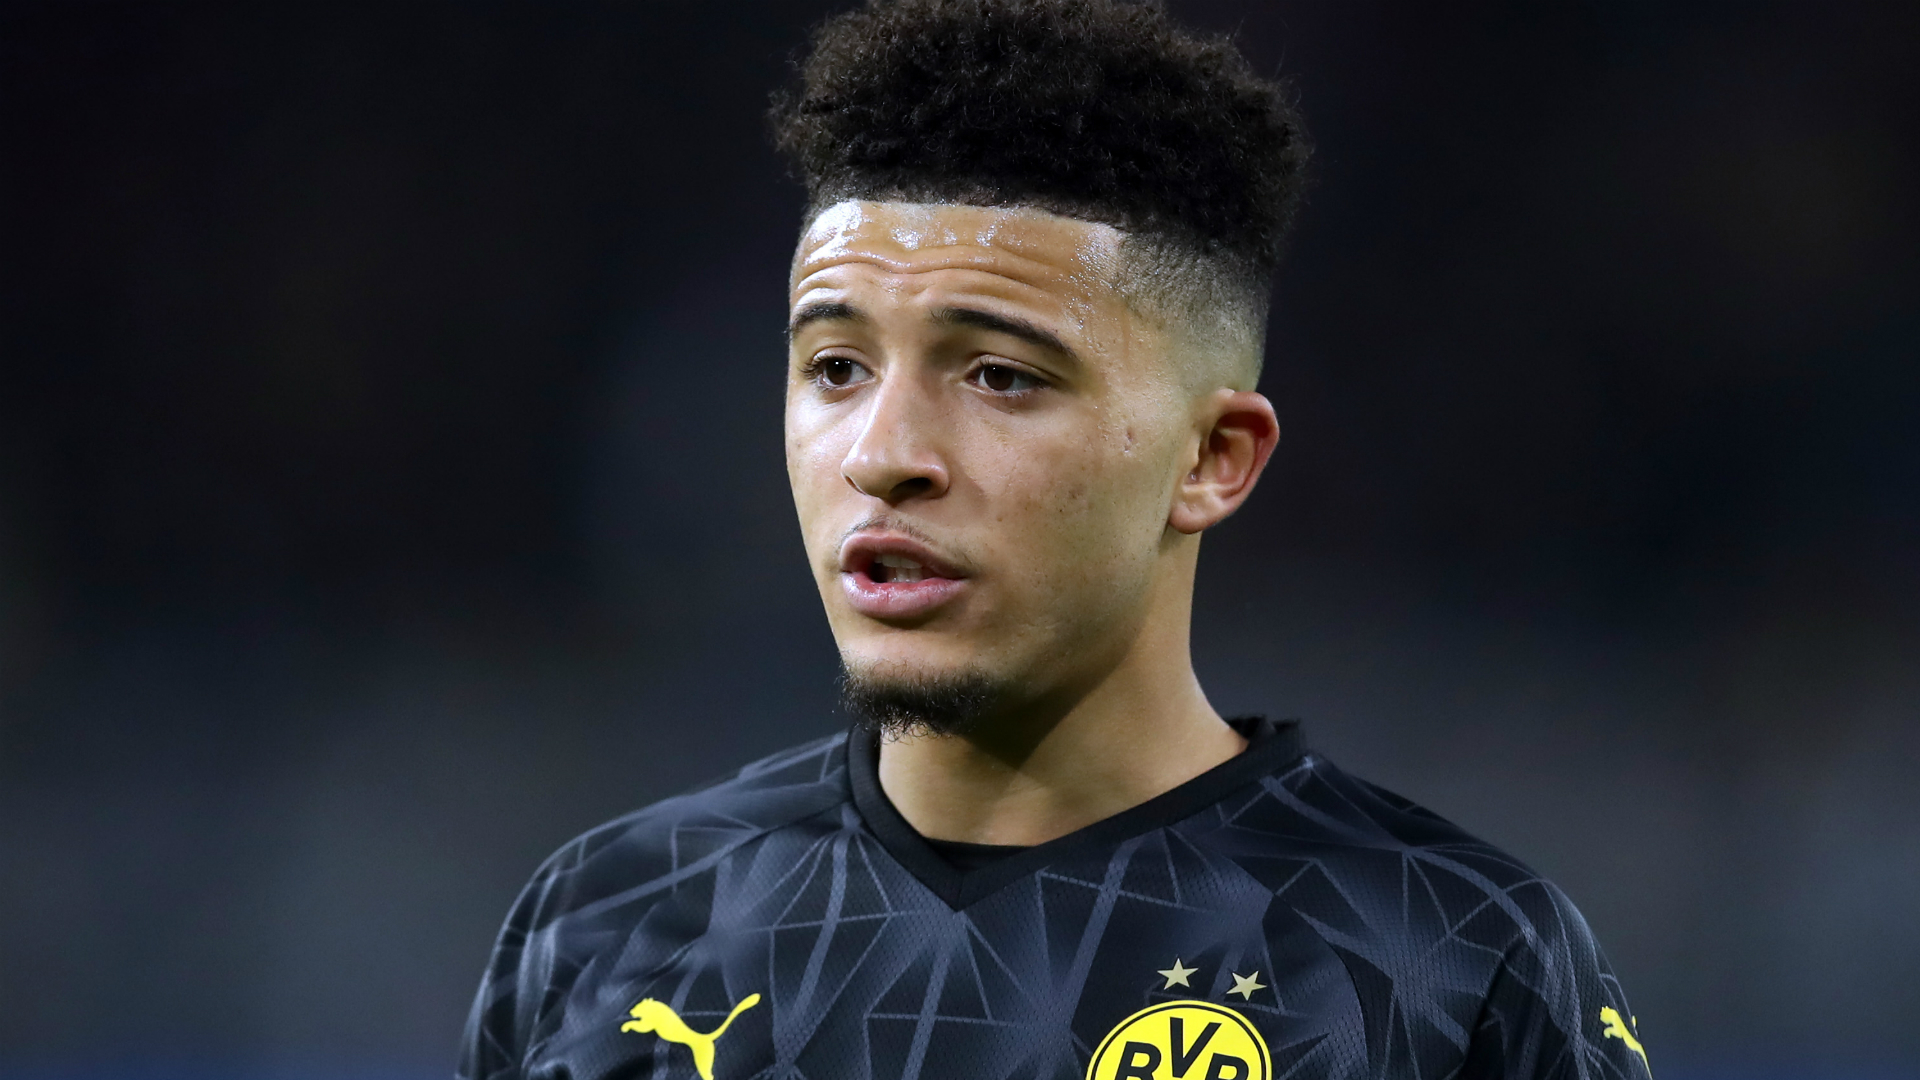 Michael Zorc was asked about Jadon Sancho and Borussia Dortmund's transfer plans.